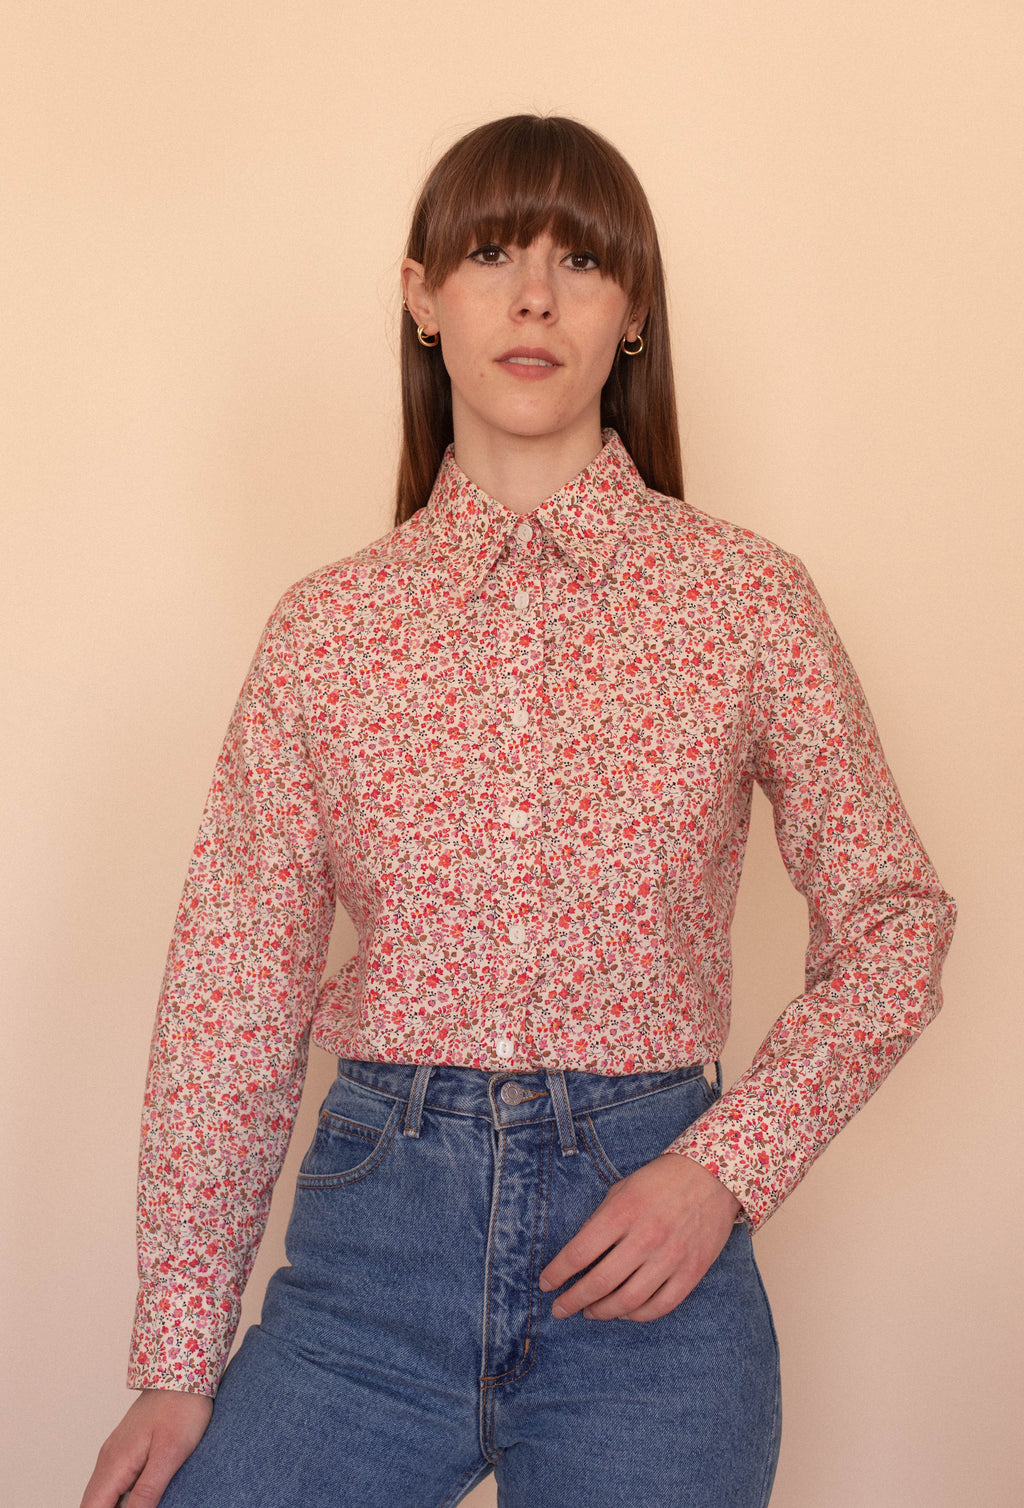 Anita is Vintage 70s Pink and Cream Floral Shirt